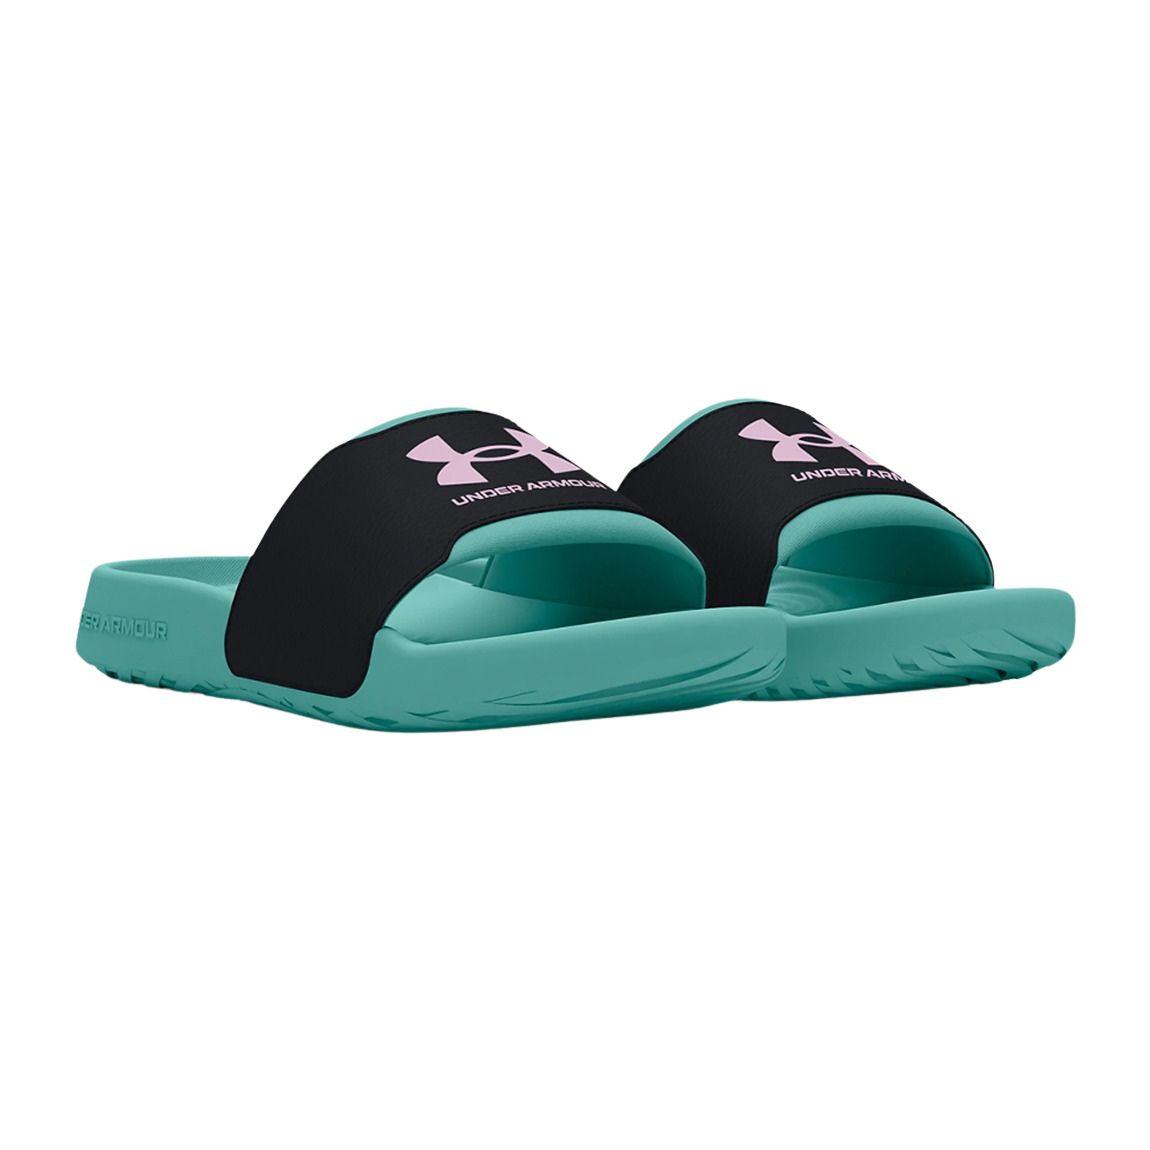 Under Armour Ignite Select Slides - Girls